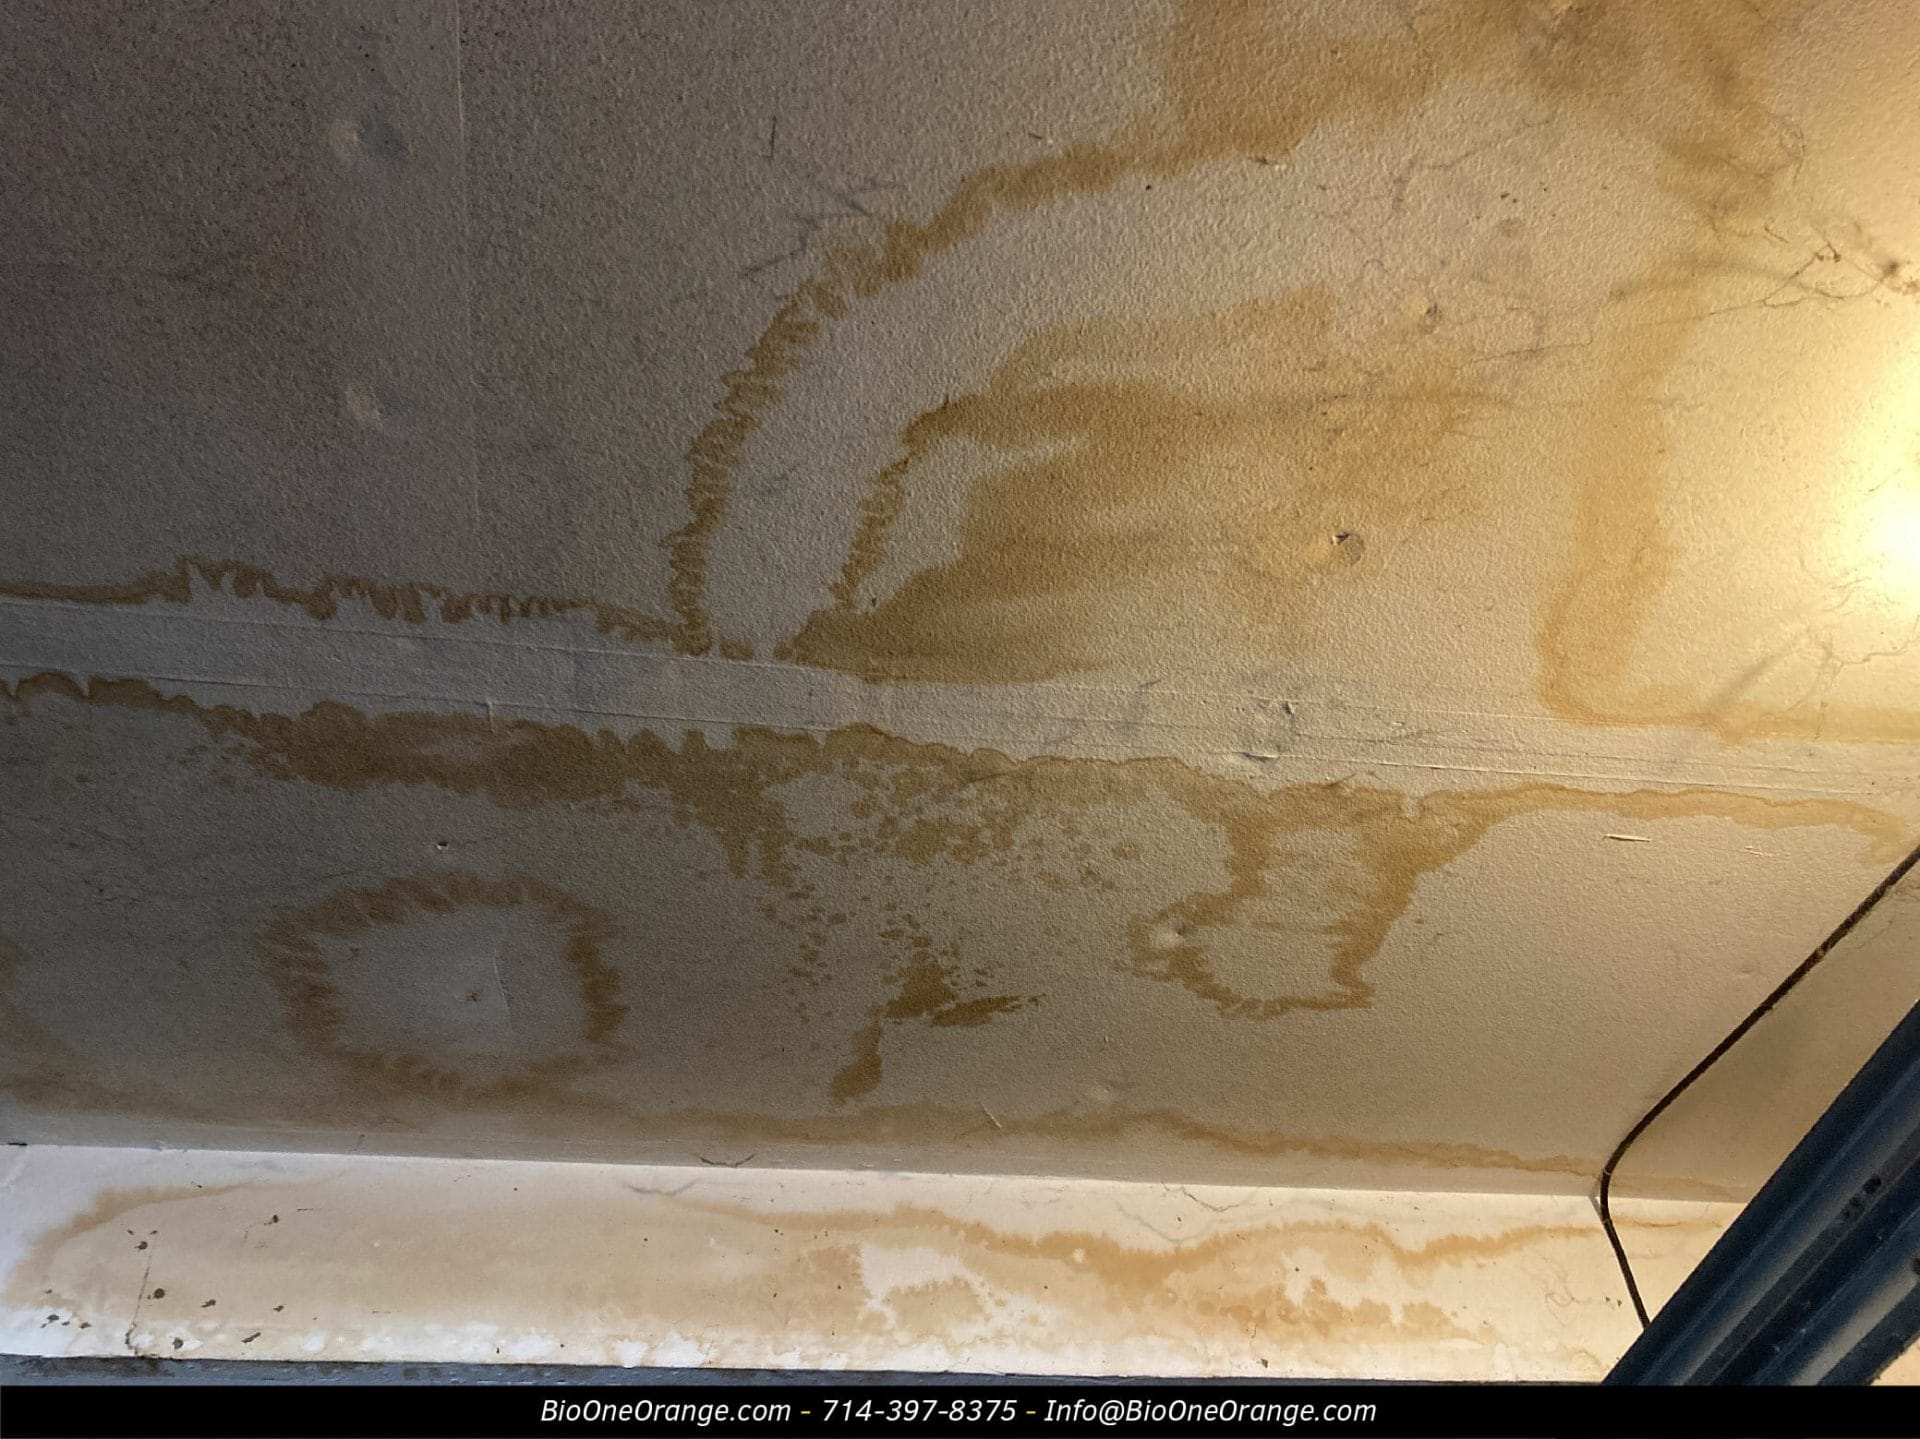 Image shows signs of mold damage in basement roof.